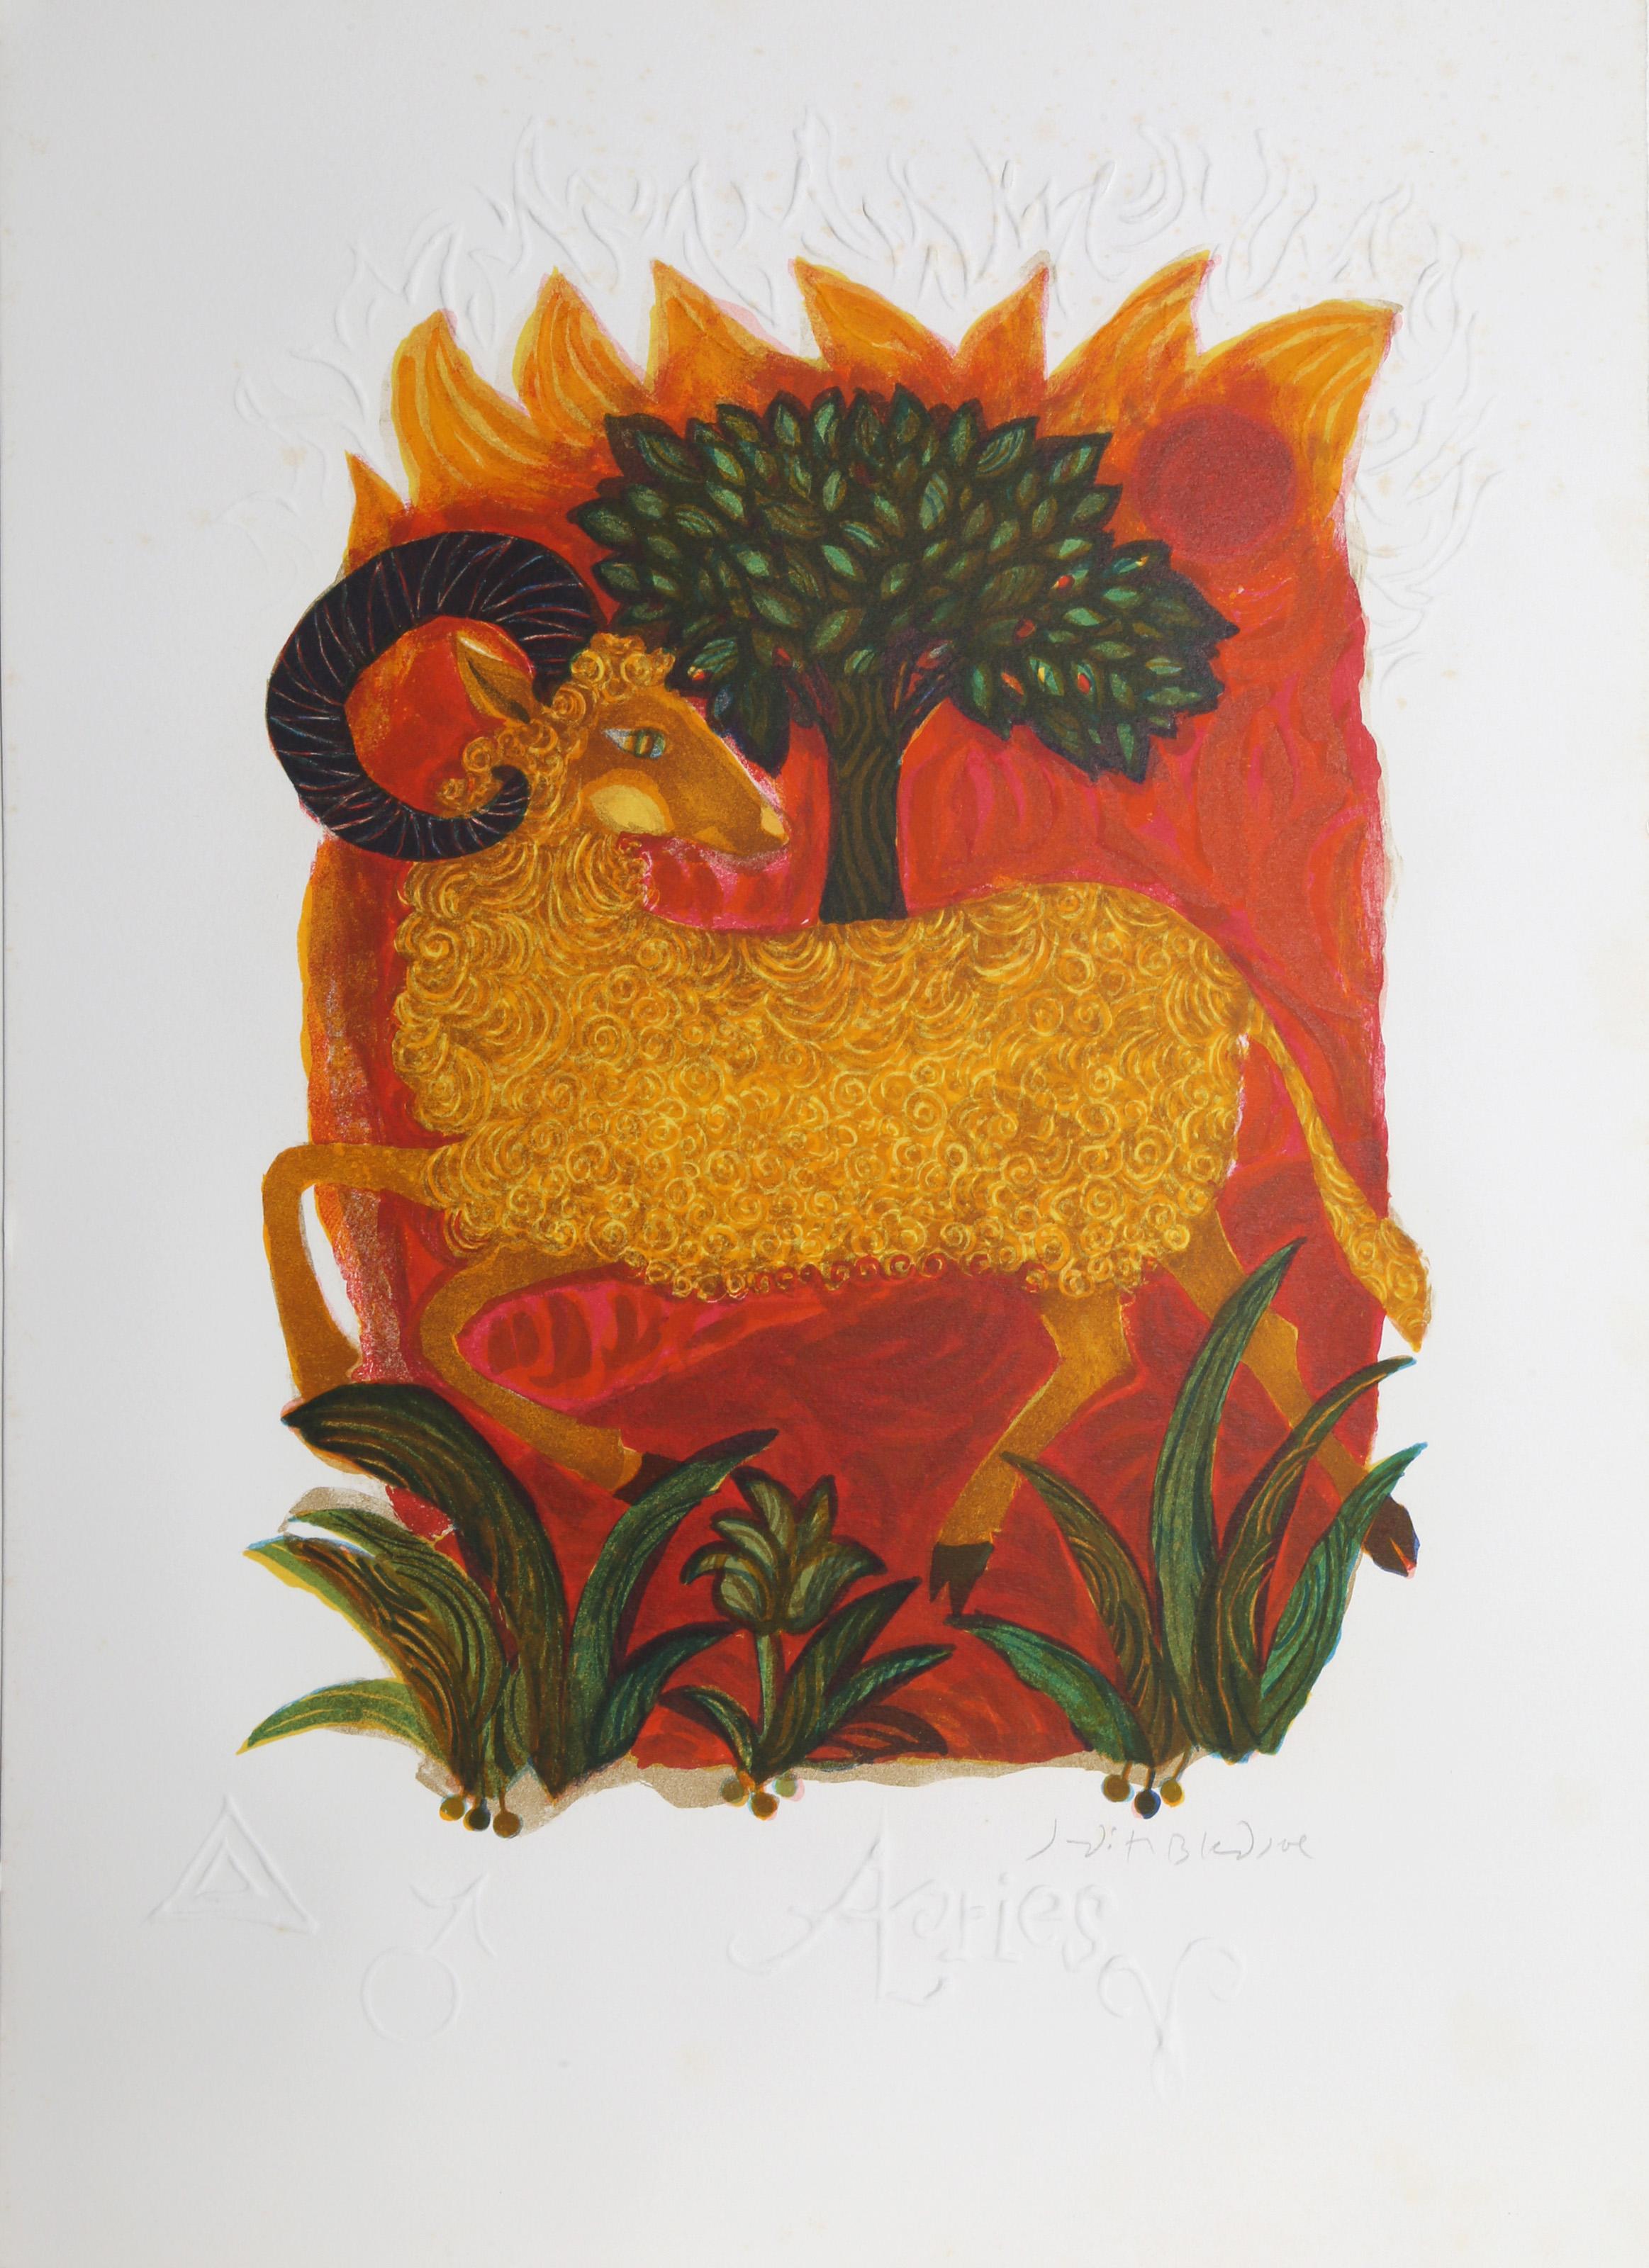 Judith Bledsoe, American (1938 - 2013) -  Aries from the Zodiac of Dreams Series. Year: circa 1970, Medium: Lithograph with Embossing, signed in pencil, Edition: EA, Size: 21 x 14.5 in. (53.34 x 36.83 cm), Description: Surrounded by a glowing fire,